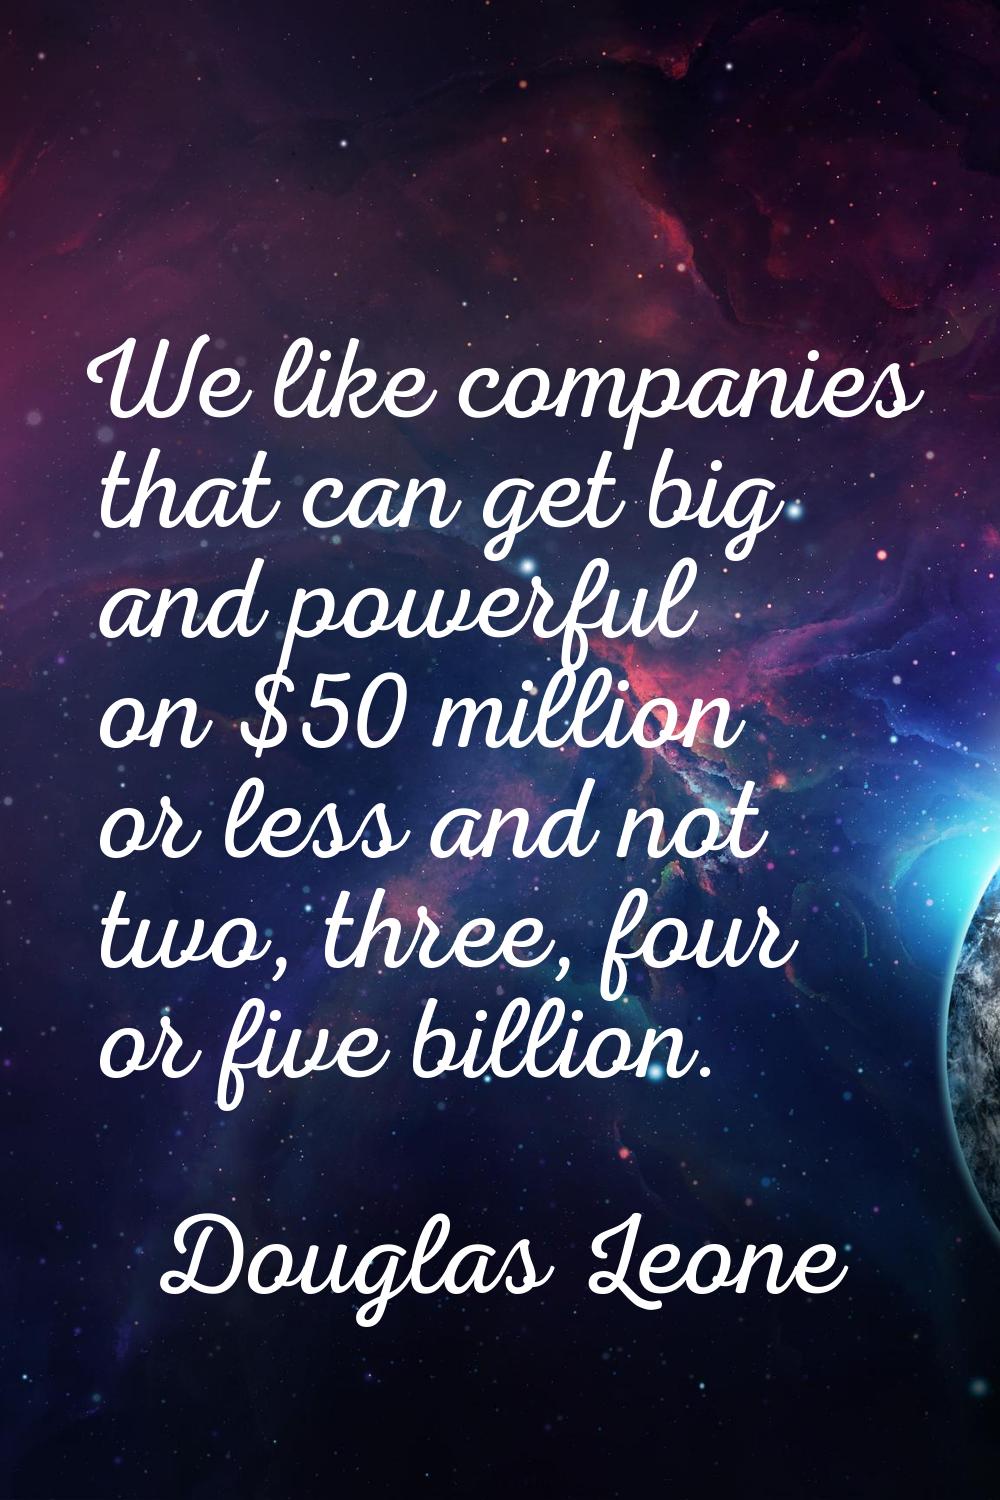 We like companies that can get big and powerful on $50 million or less and not two, three, four or 